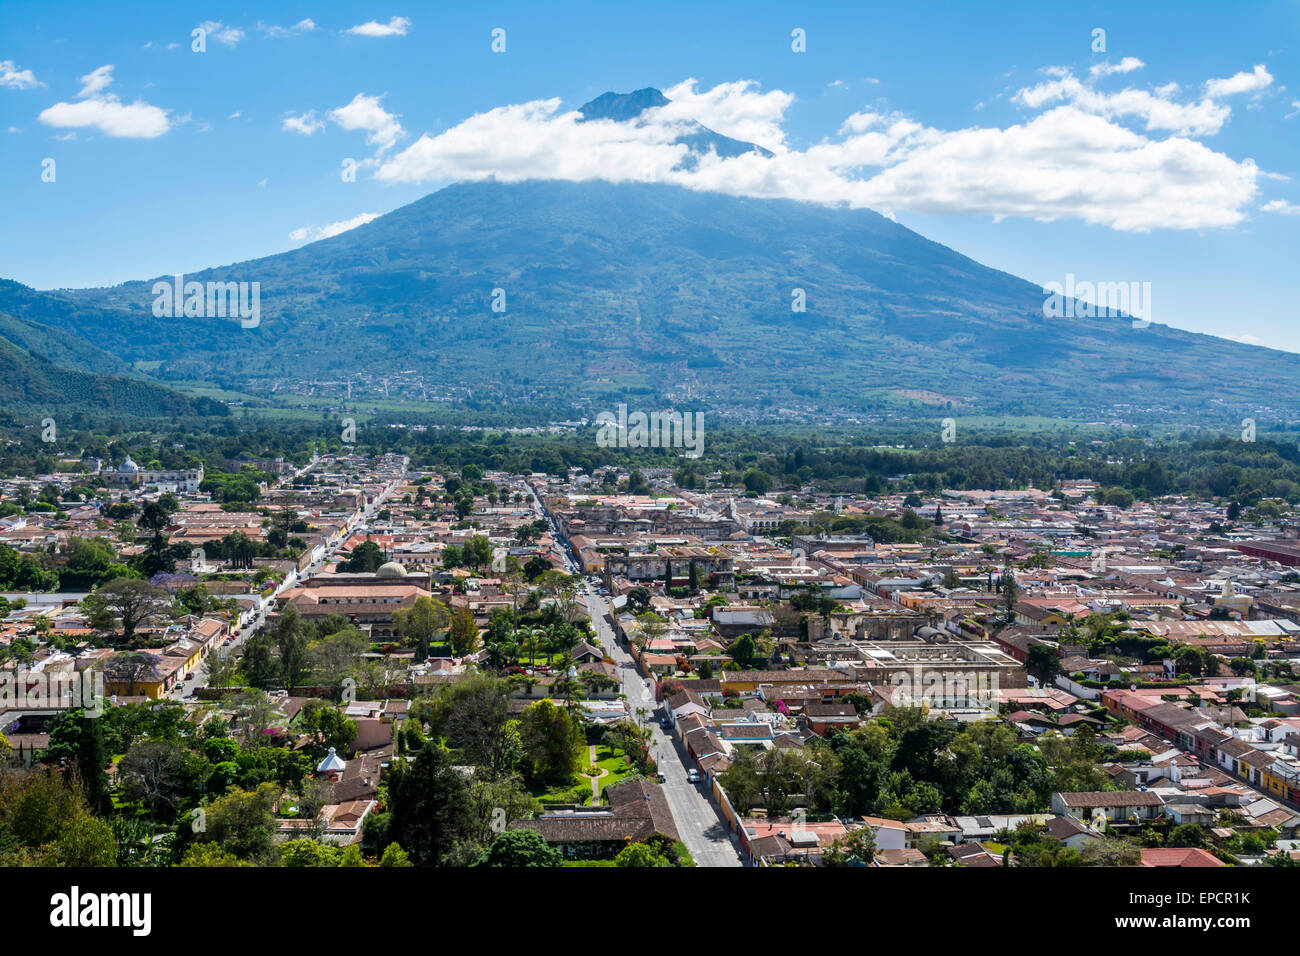 Aerial view of Antigua Guatemala with Volcan de Agua in the distance. Stock Photo